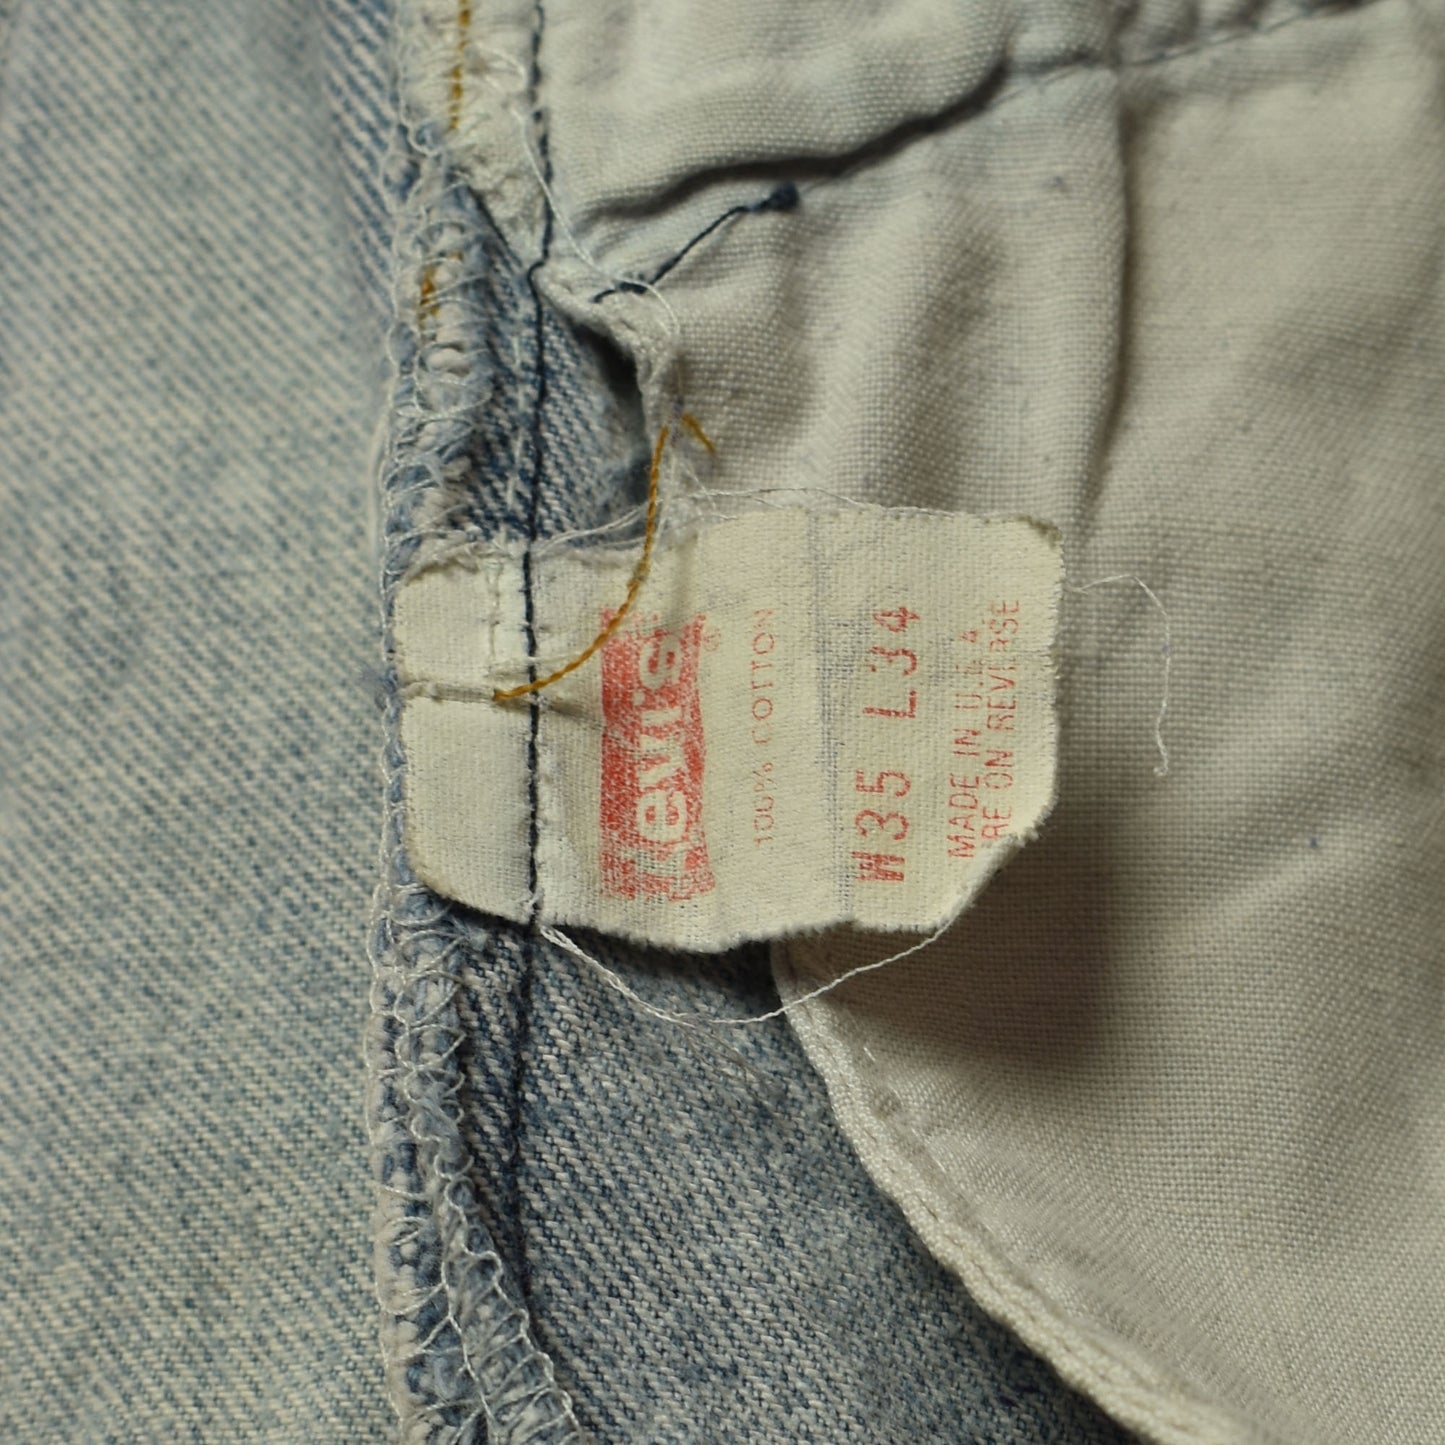 Vintage 501 Levi's Made in USA Patchwork Light Wash Button Fly Jeans